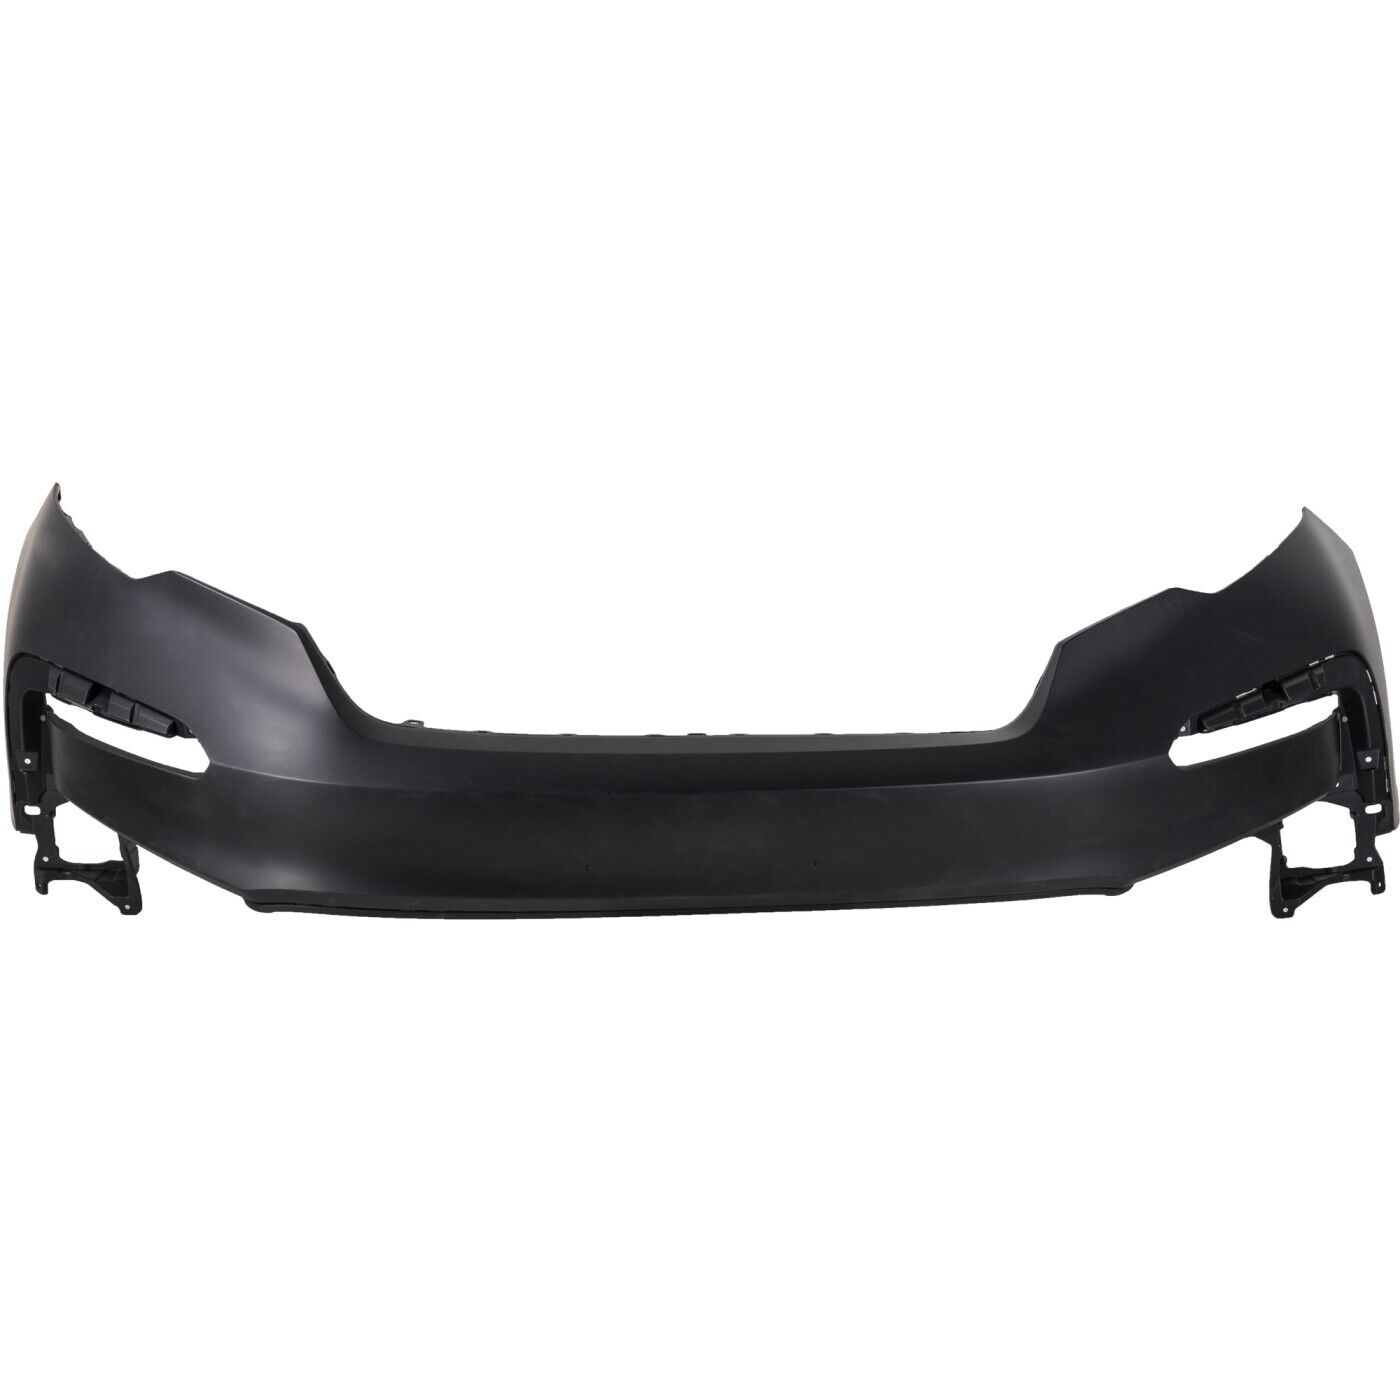 2019-2022 HONDA PILOT; Front Bumper Cover upper; Painted to Match